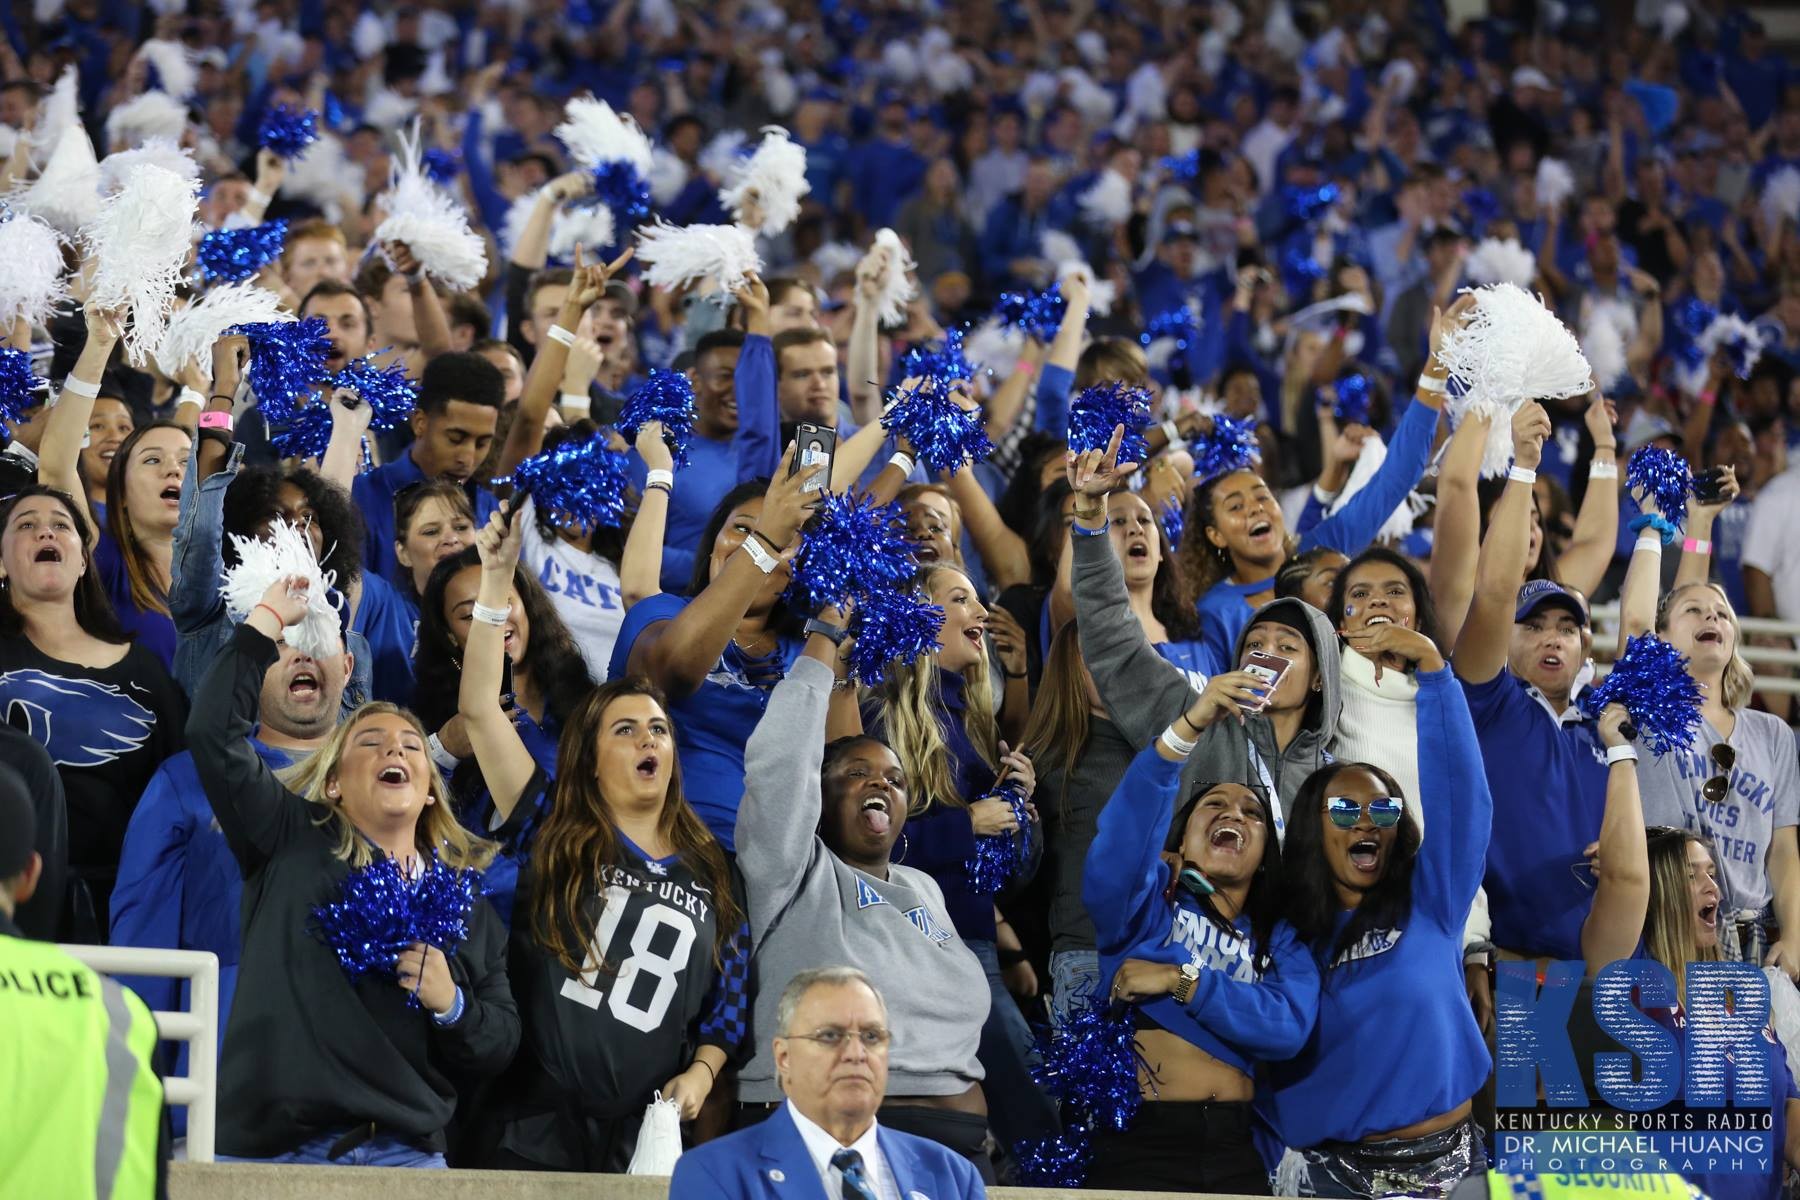 UK vs. Florida one of the hottest tickets in college football